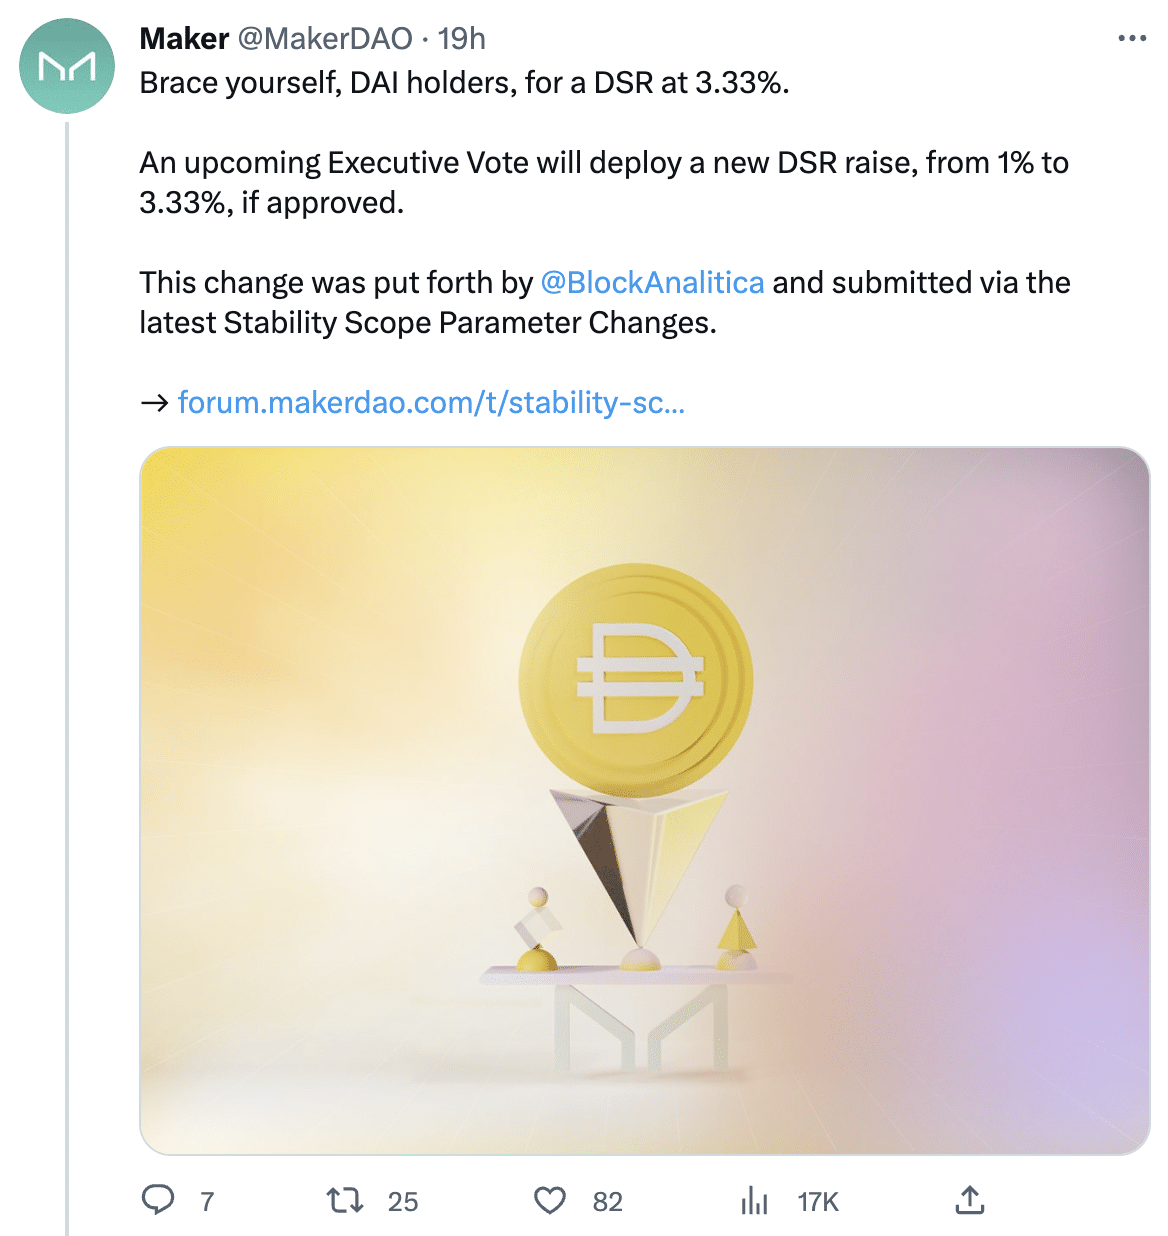 MakerDAO's new proposal to boost DAI savings rate to 3.33%